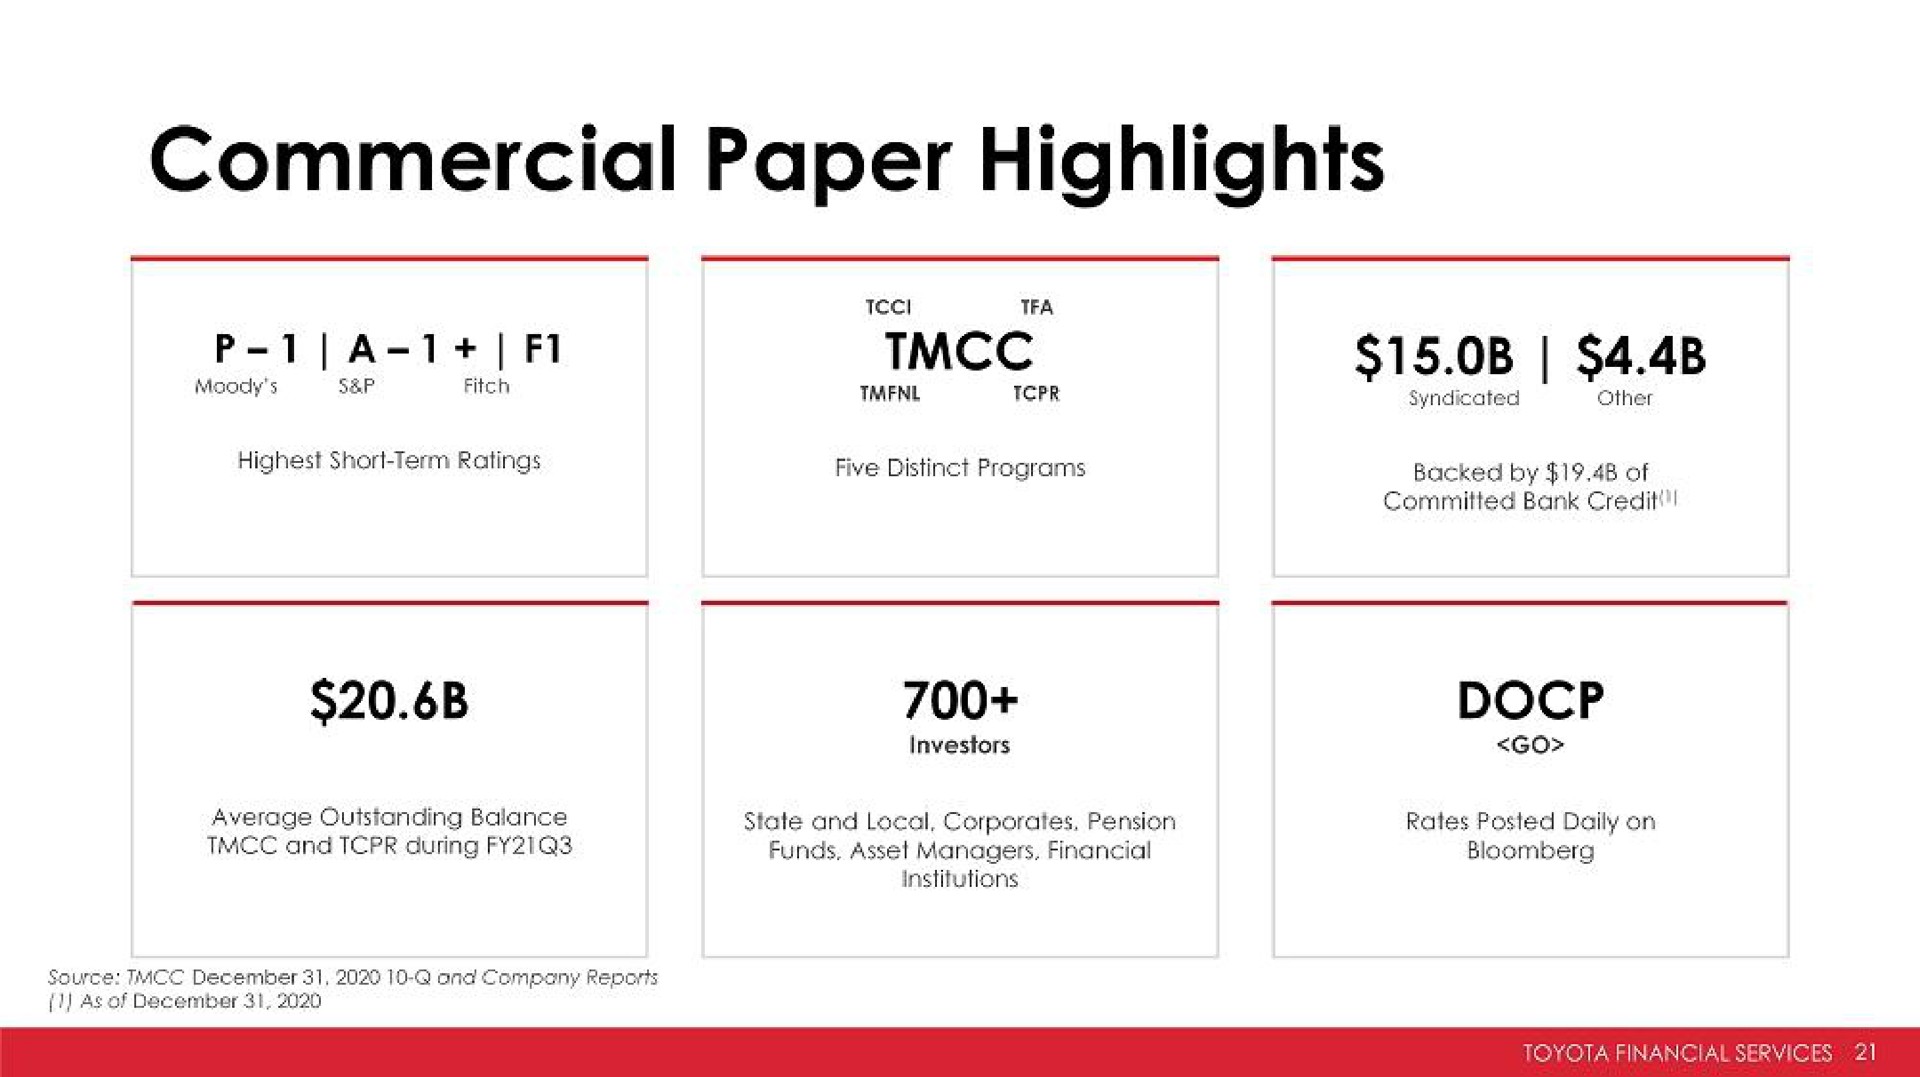 commercial paper highlights | Toyota